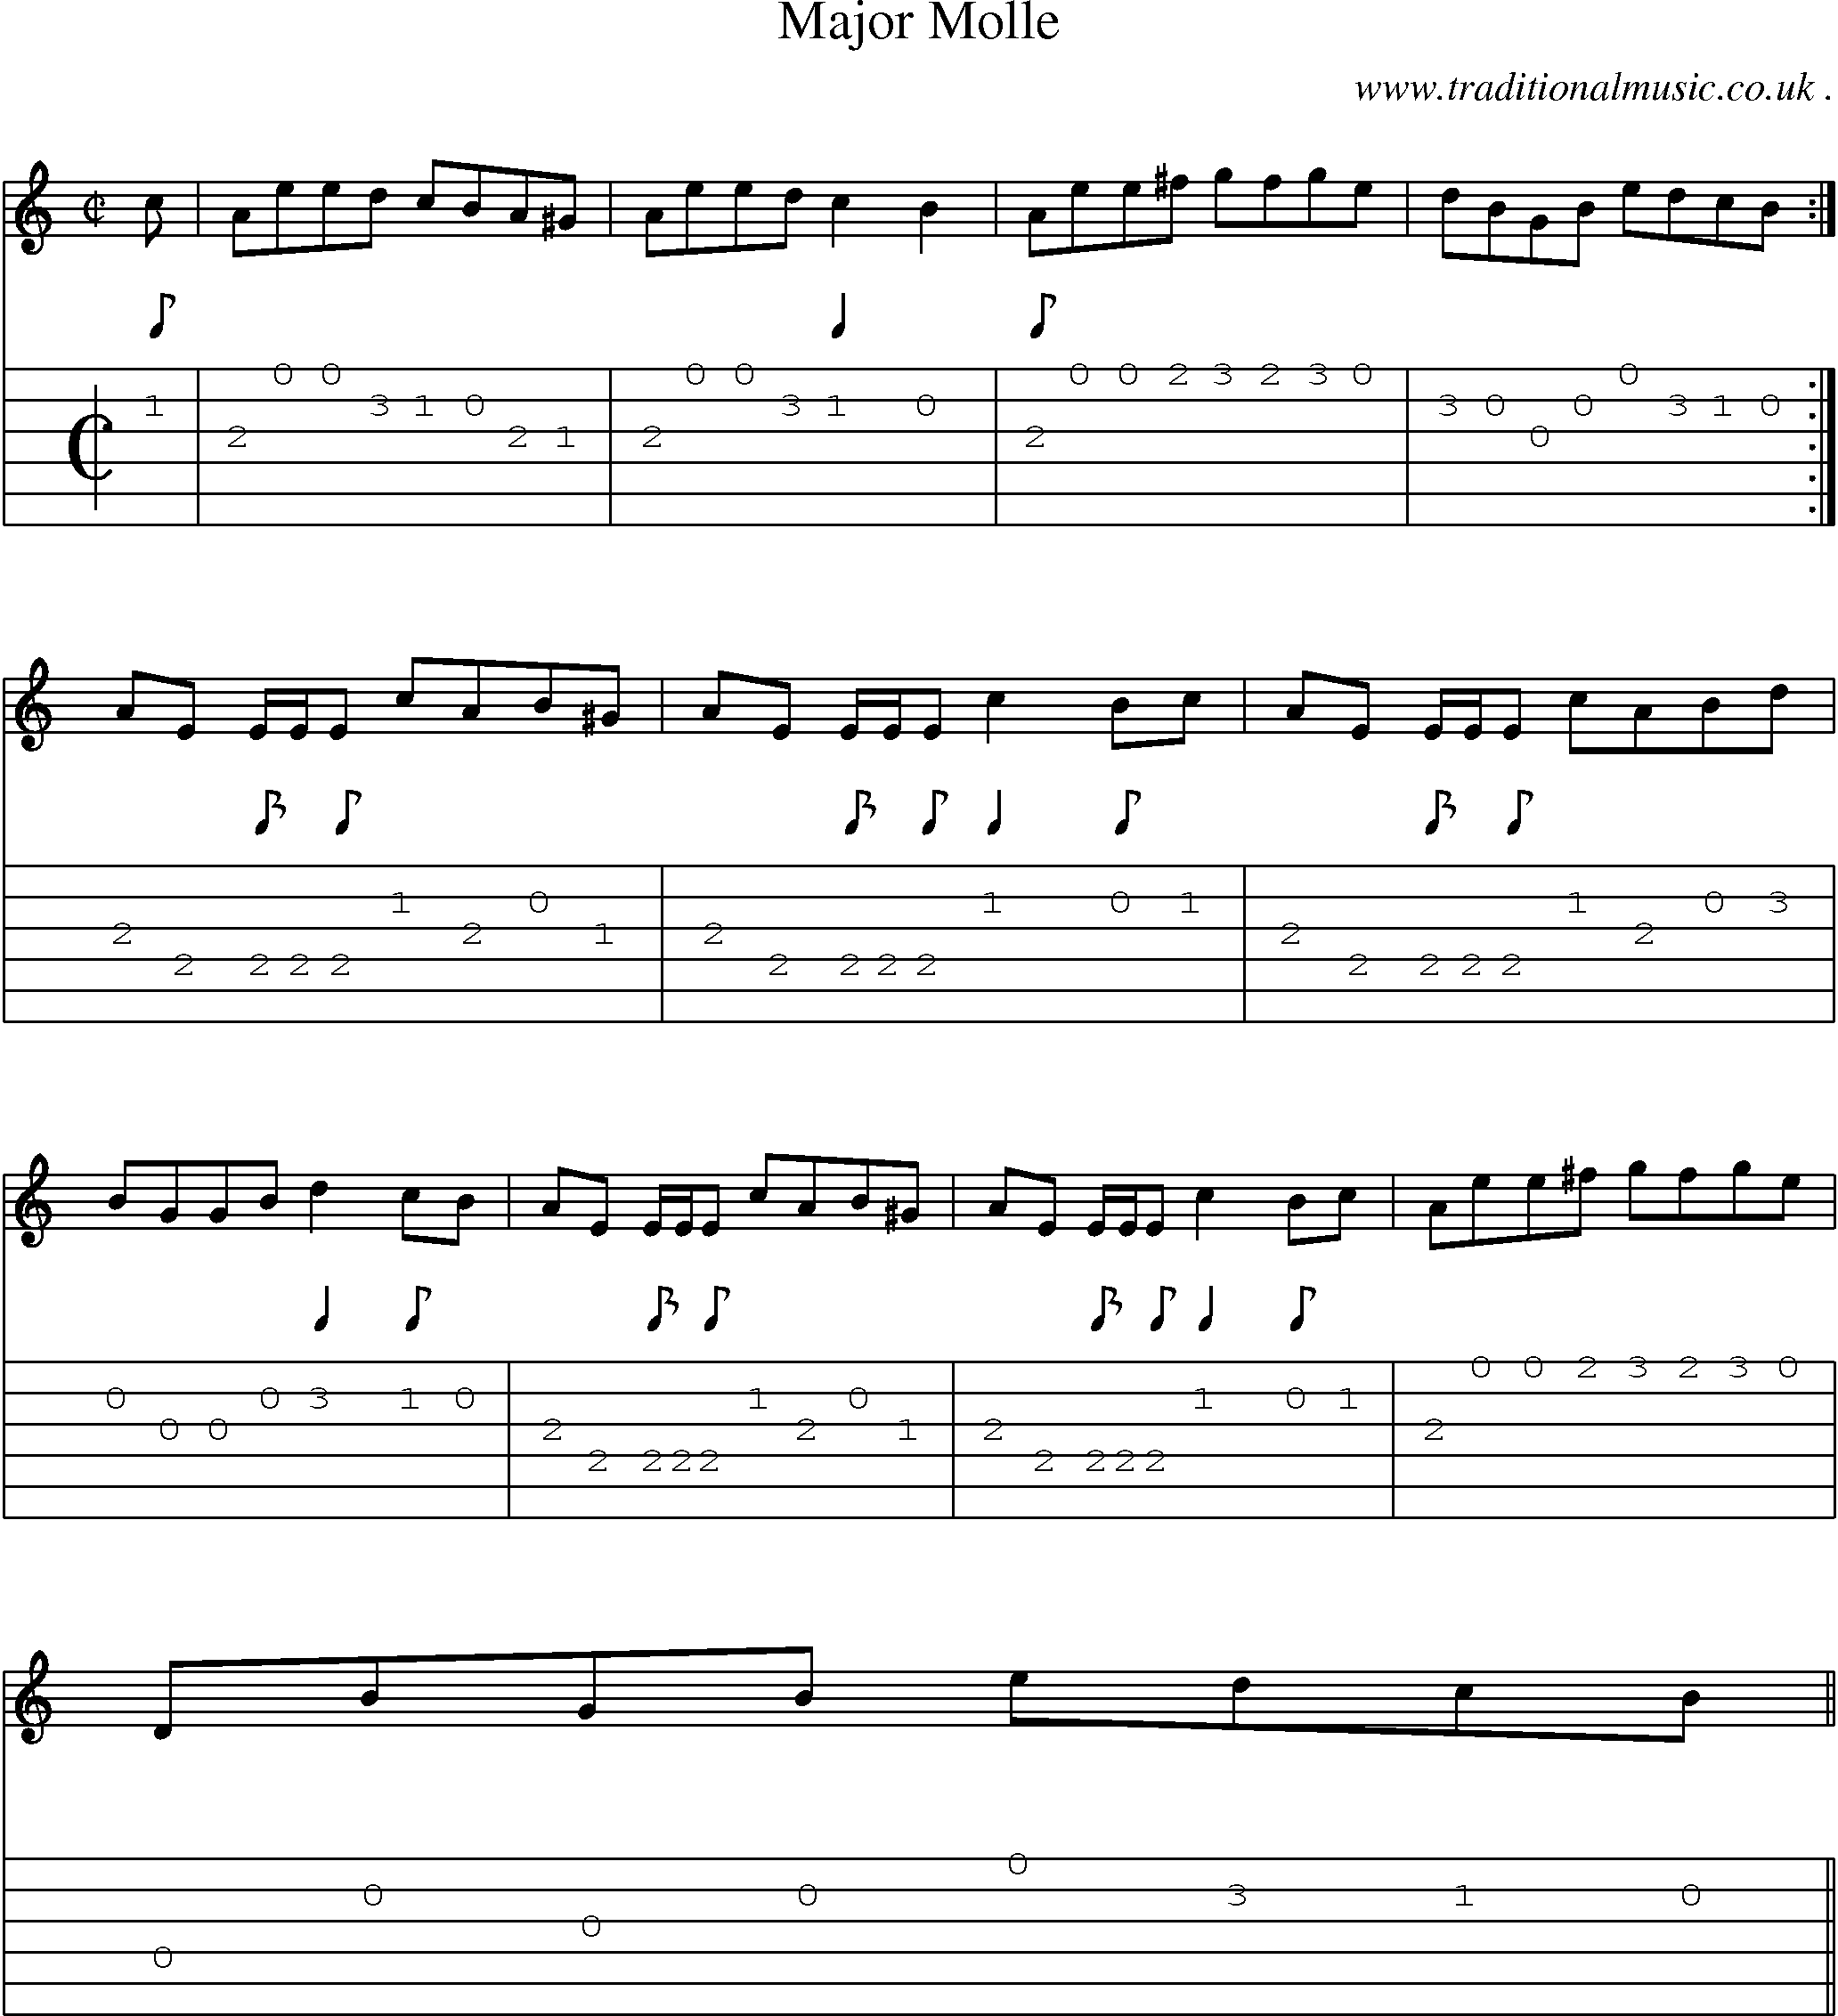 Sheet-music  score, Chords and Guitar Tabs for Major Molle